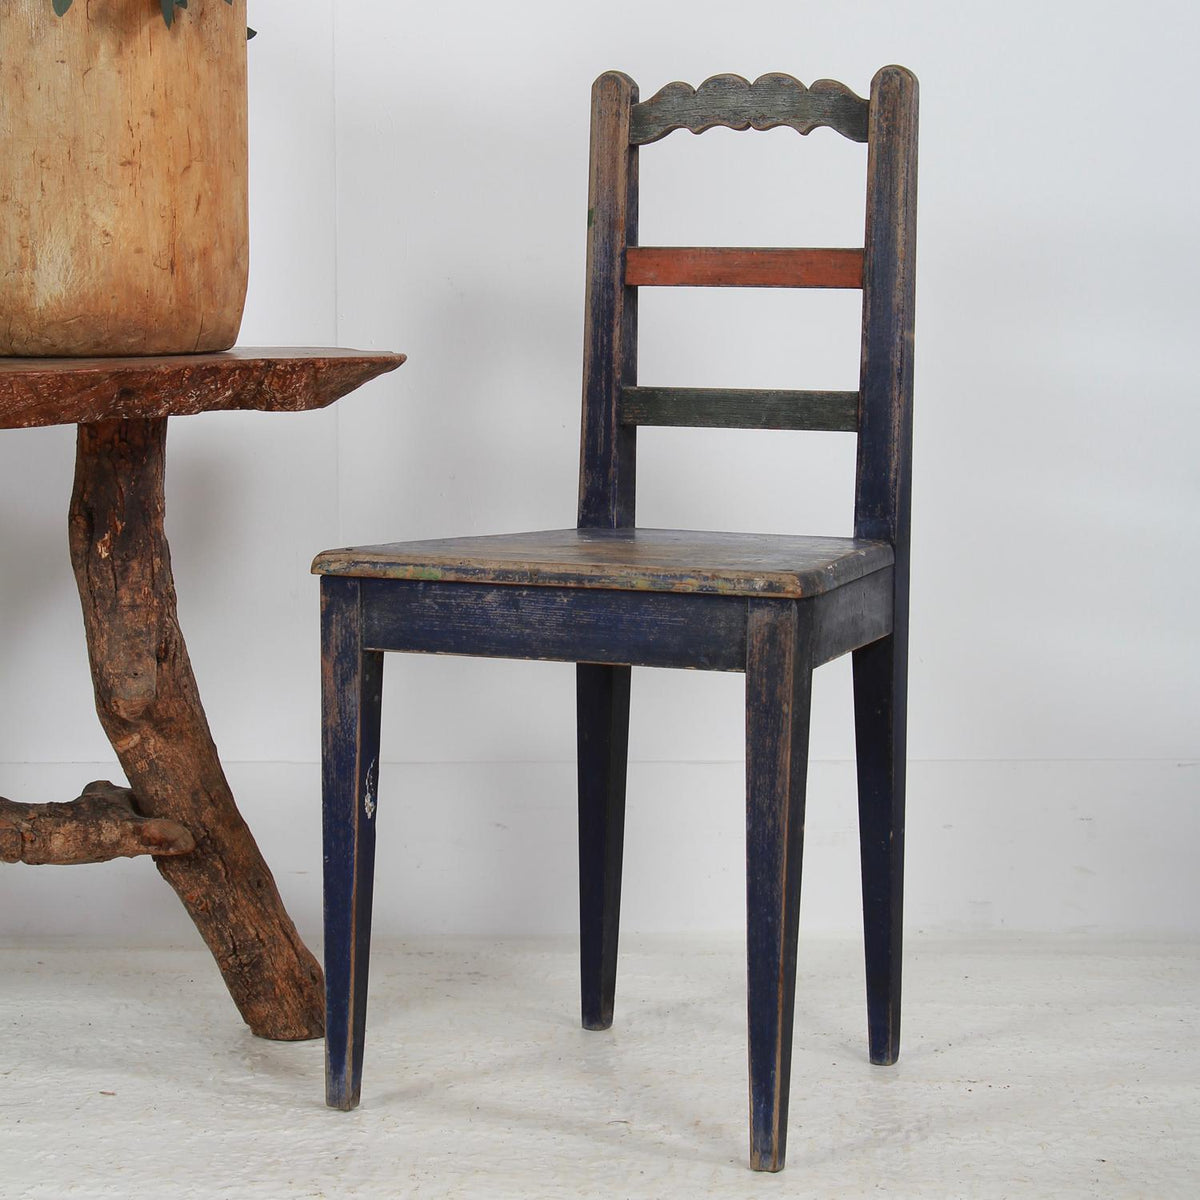 CHARMING SWEDISH COUNTRY CHAIR IN ORIGINAL BLUE PAINT